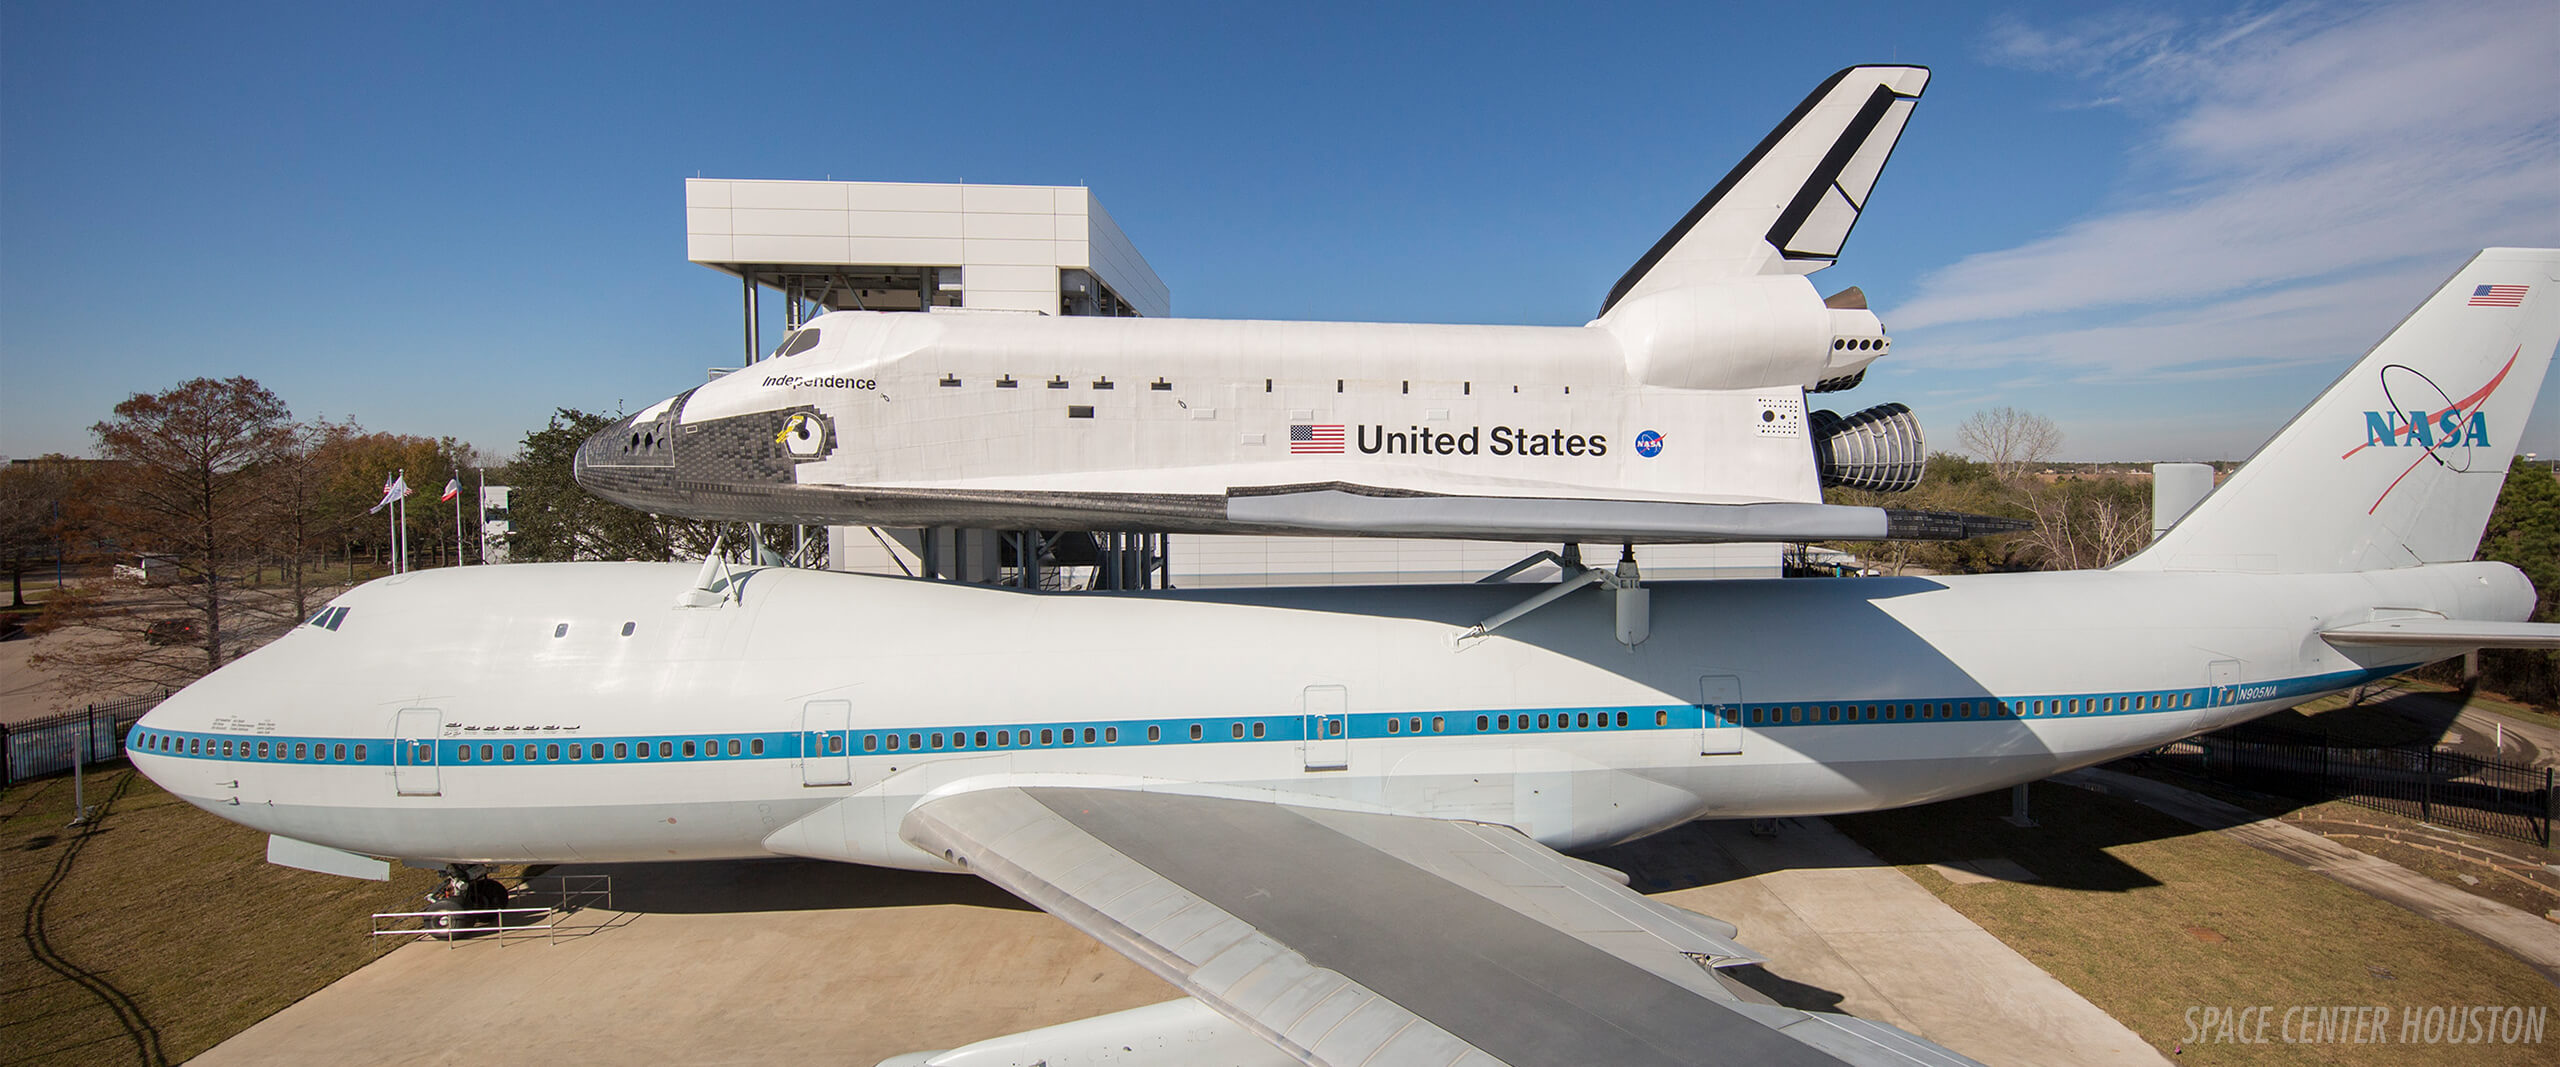 The space shuttle replica on top of a Boeng 747 at the Space Center in Houston